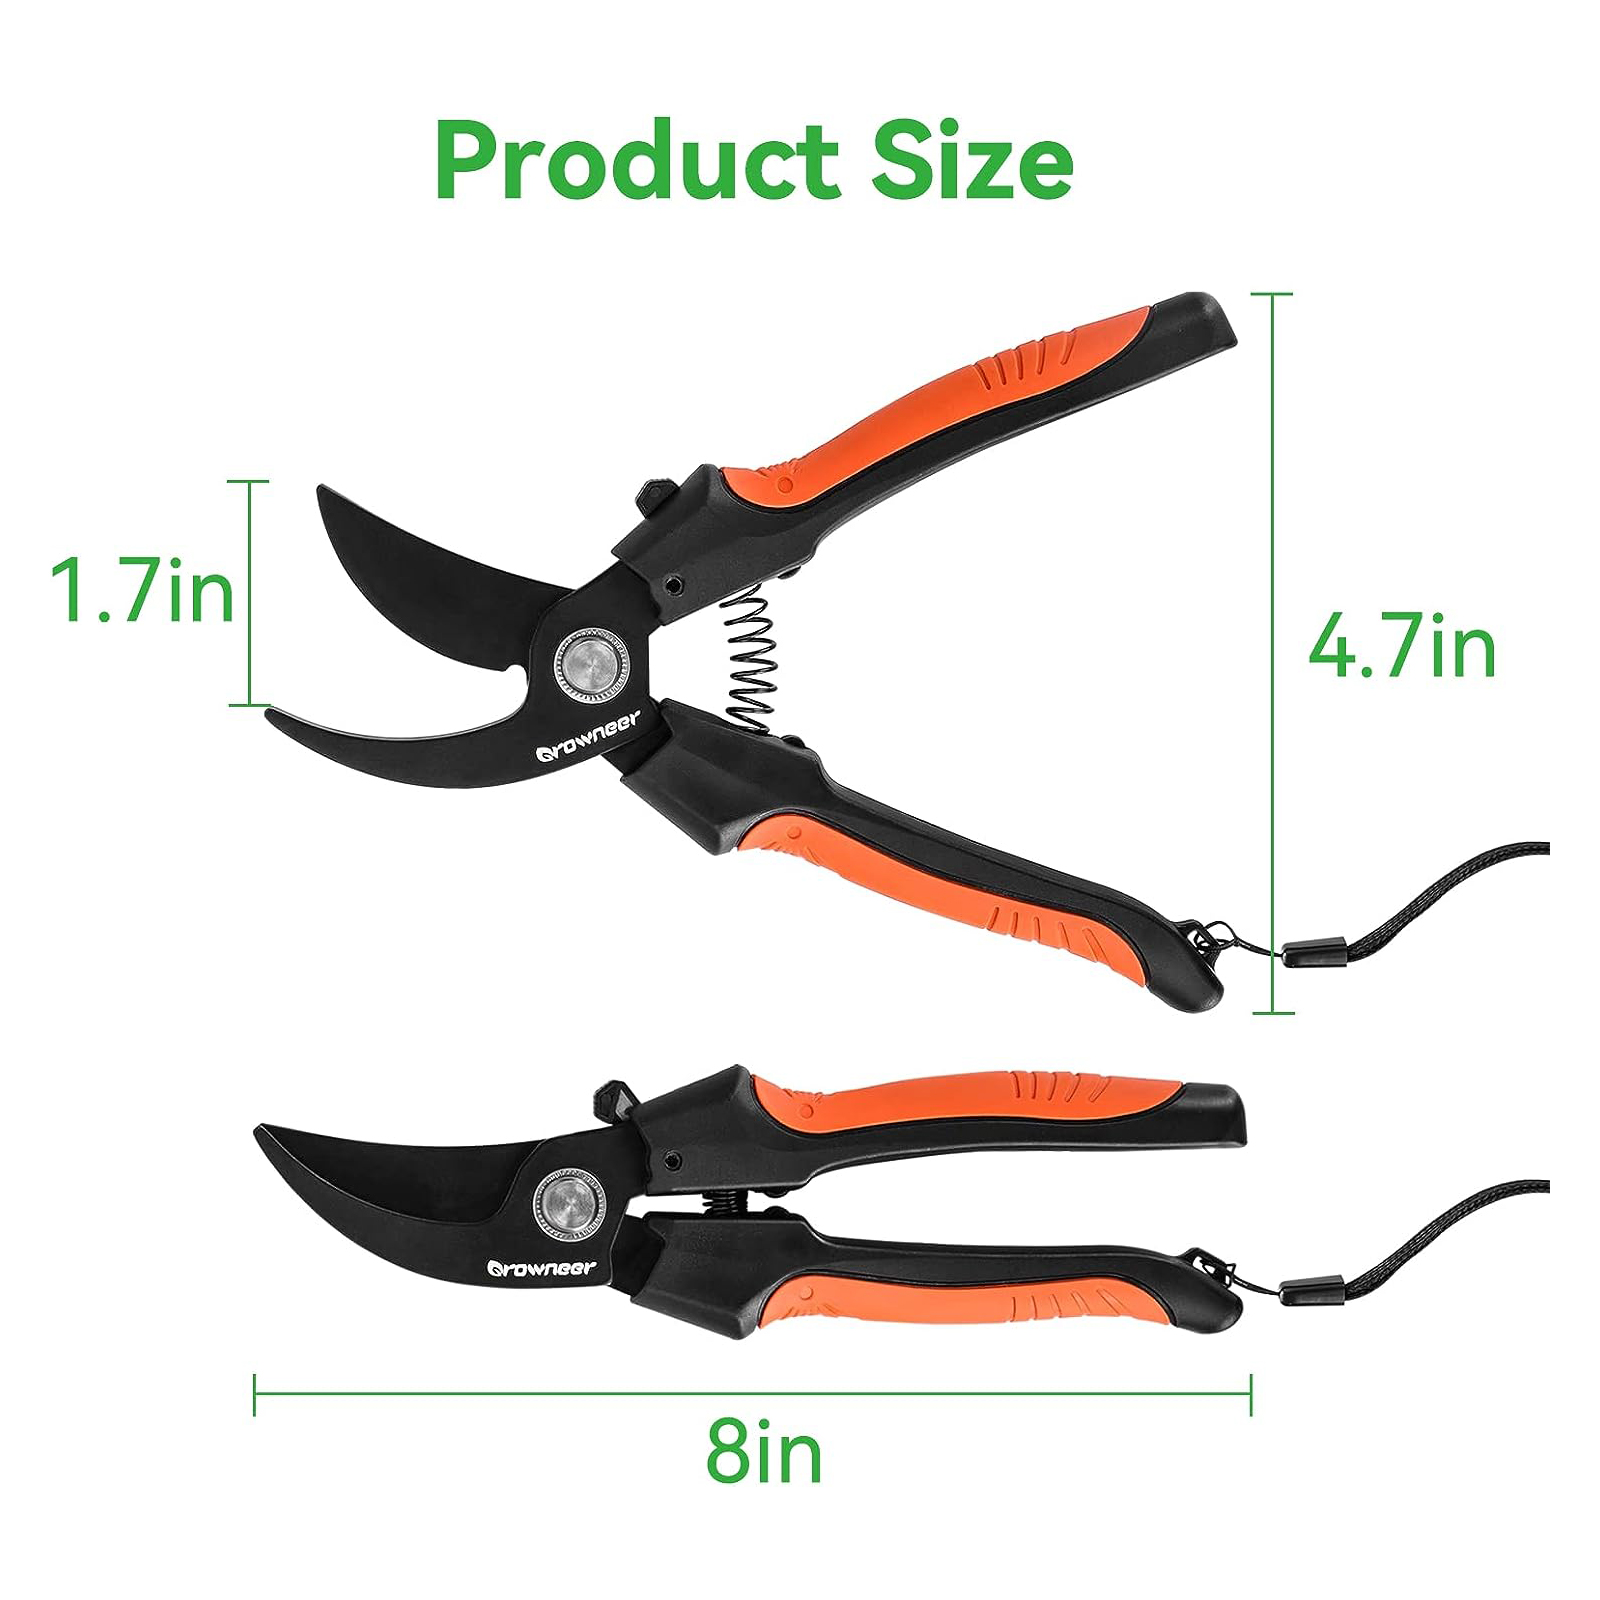  GROWNEER 3 Packs 6.5 Inch Pruning Shears with Curved